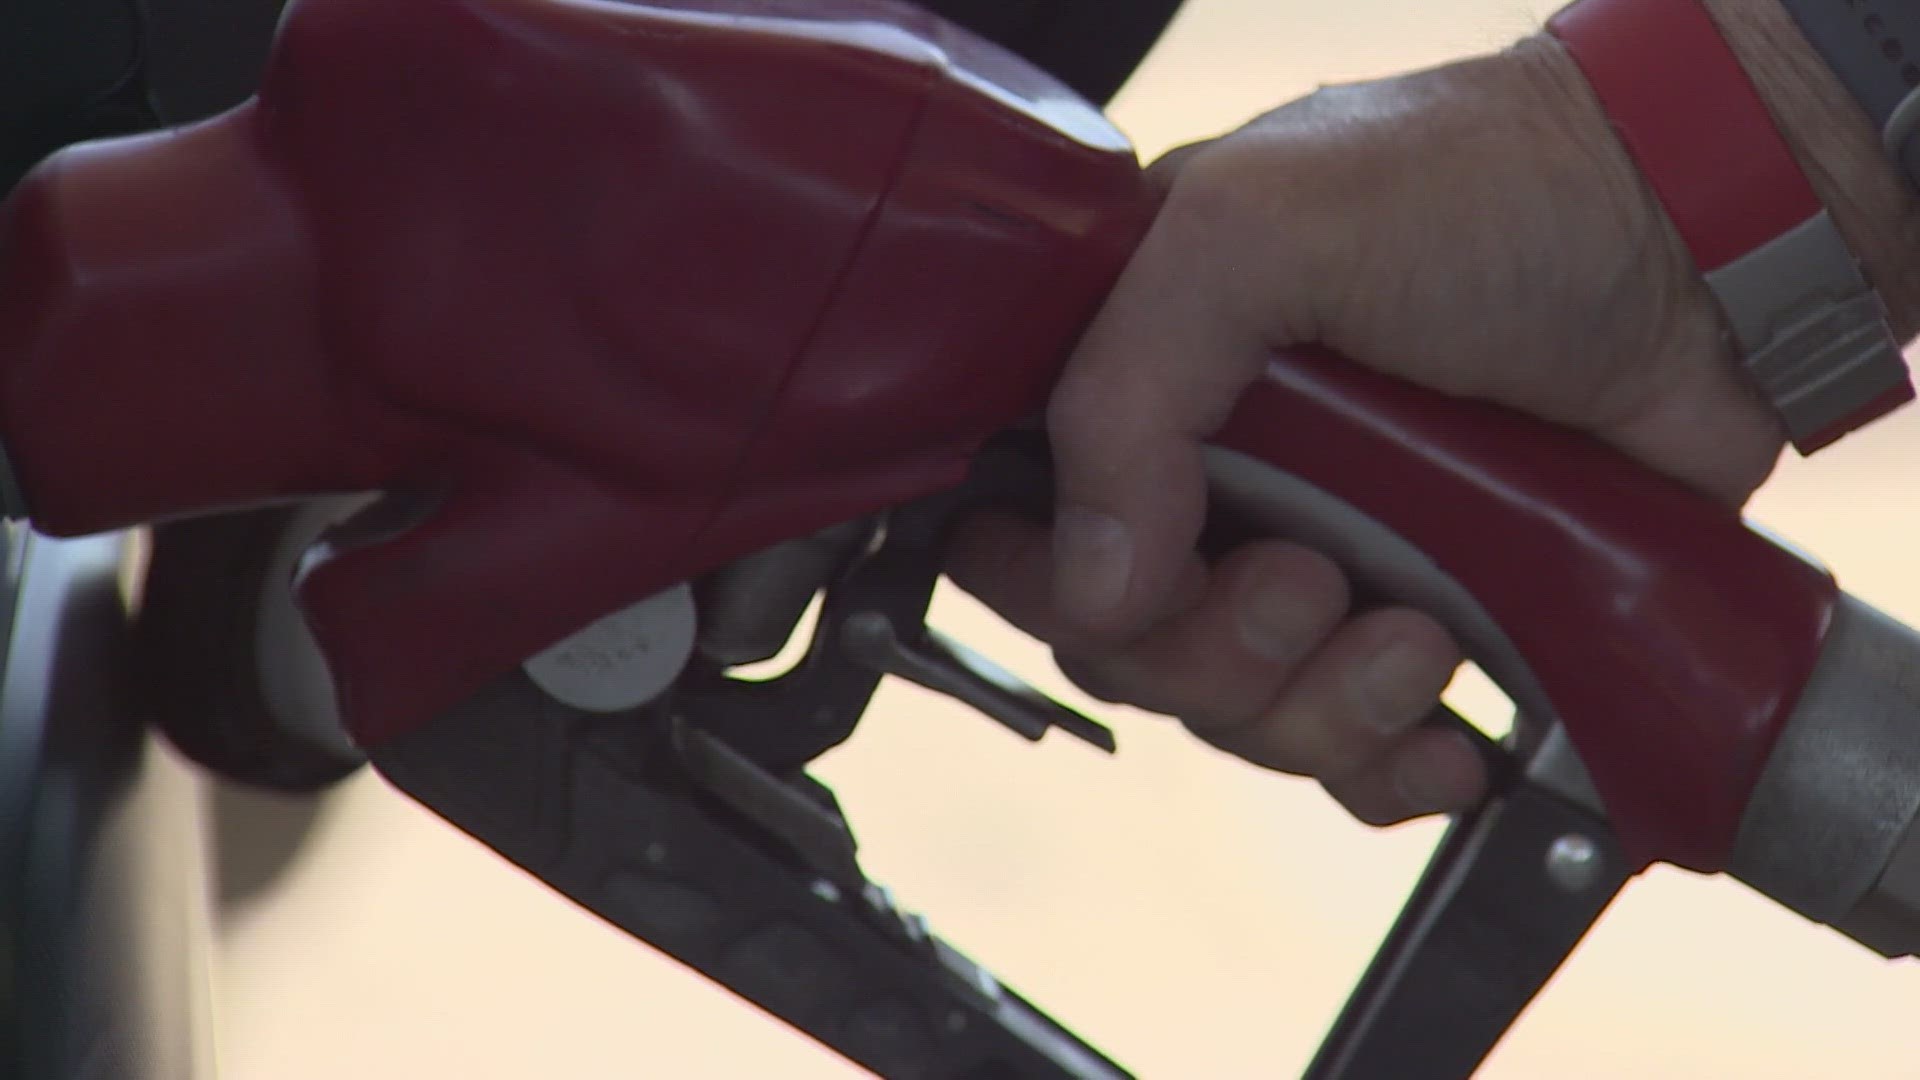 Washington drivers are still paying the highest prices to fill their tanks in the entire country. Now, 43 lawmakers called on the Department of Ecology to step in.